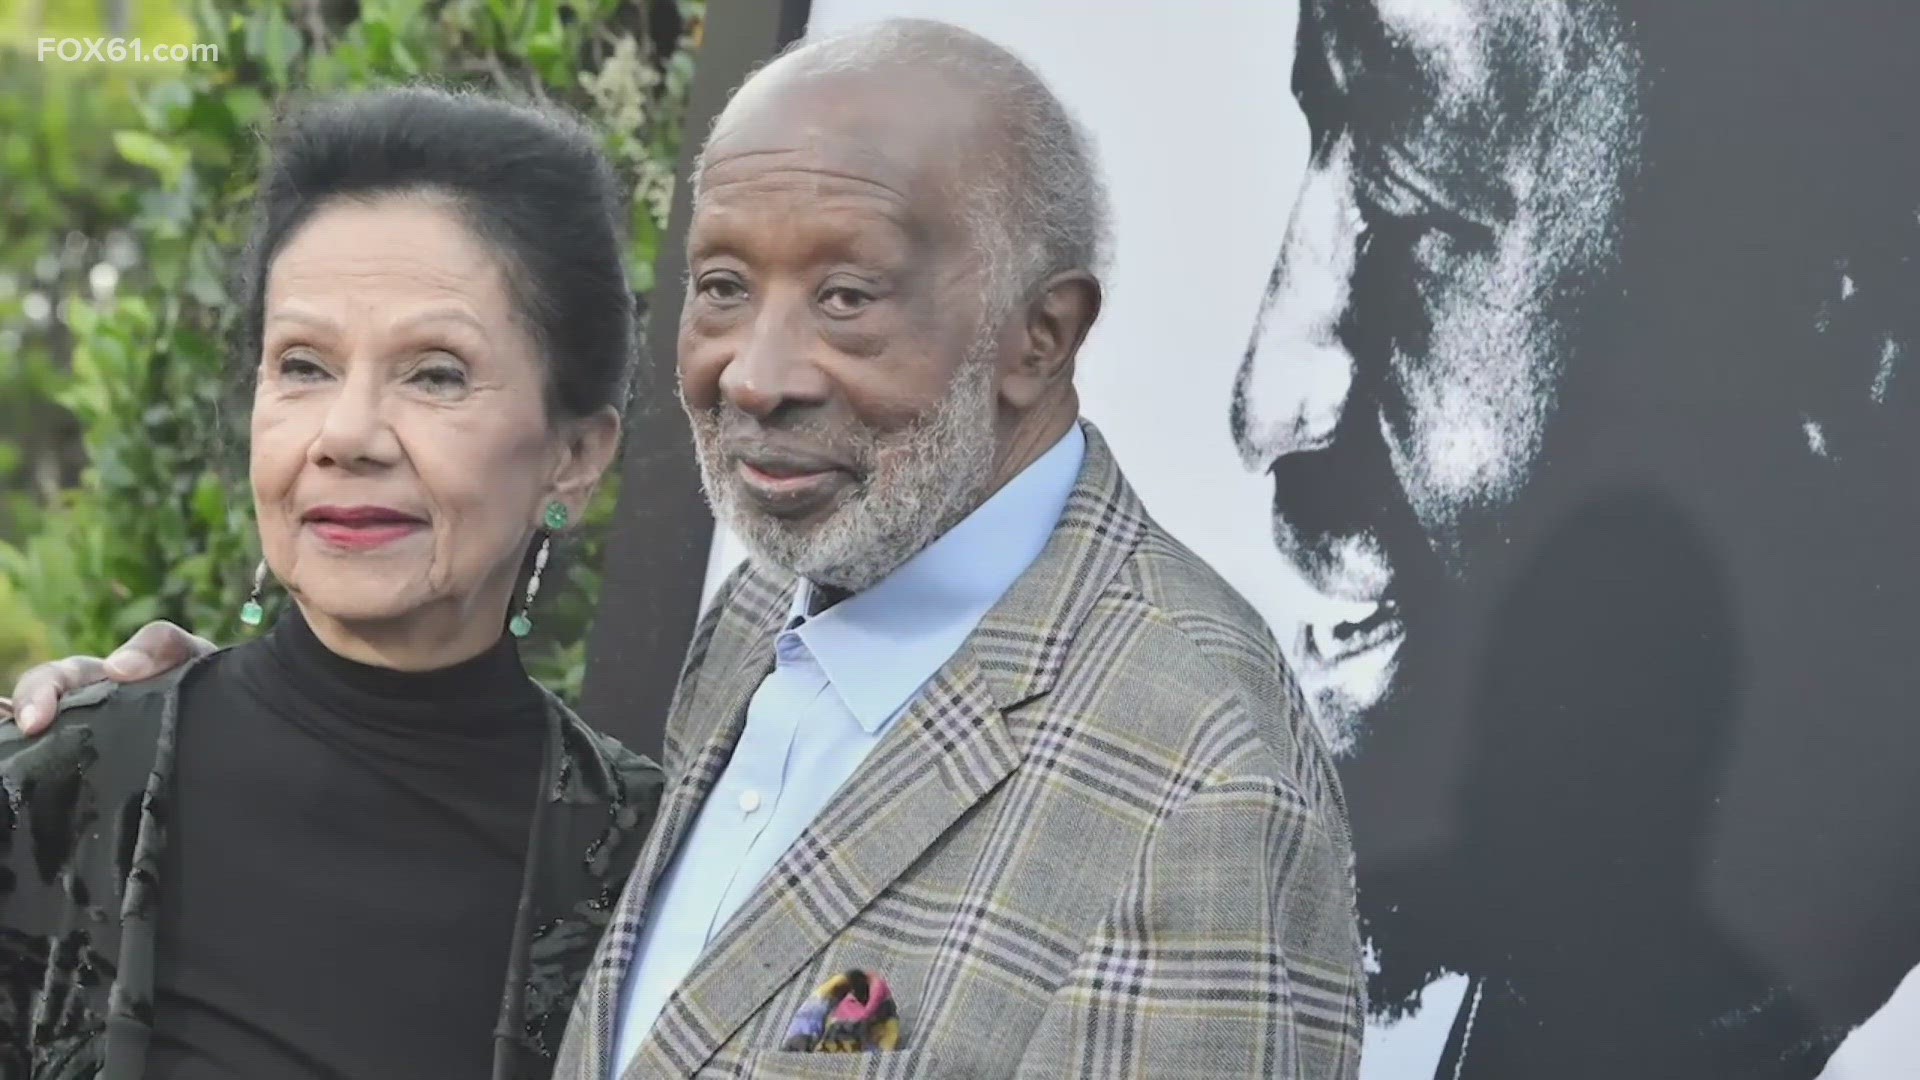 Clarence Avant died at the age of 92. He was also known as 'The Black Godfather.'